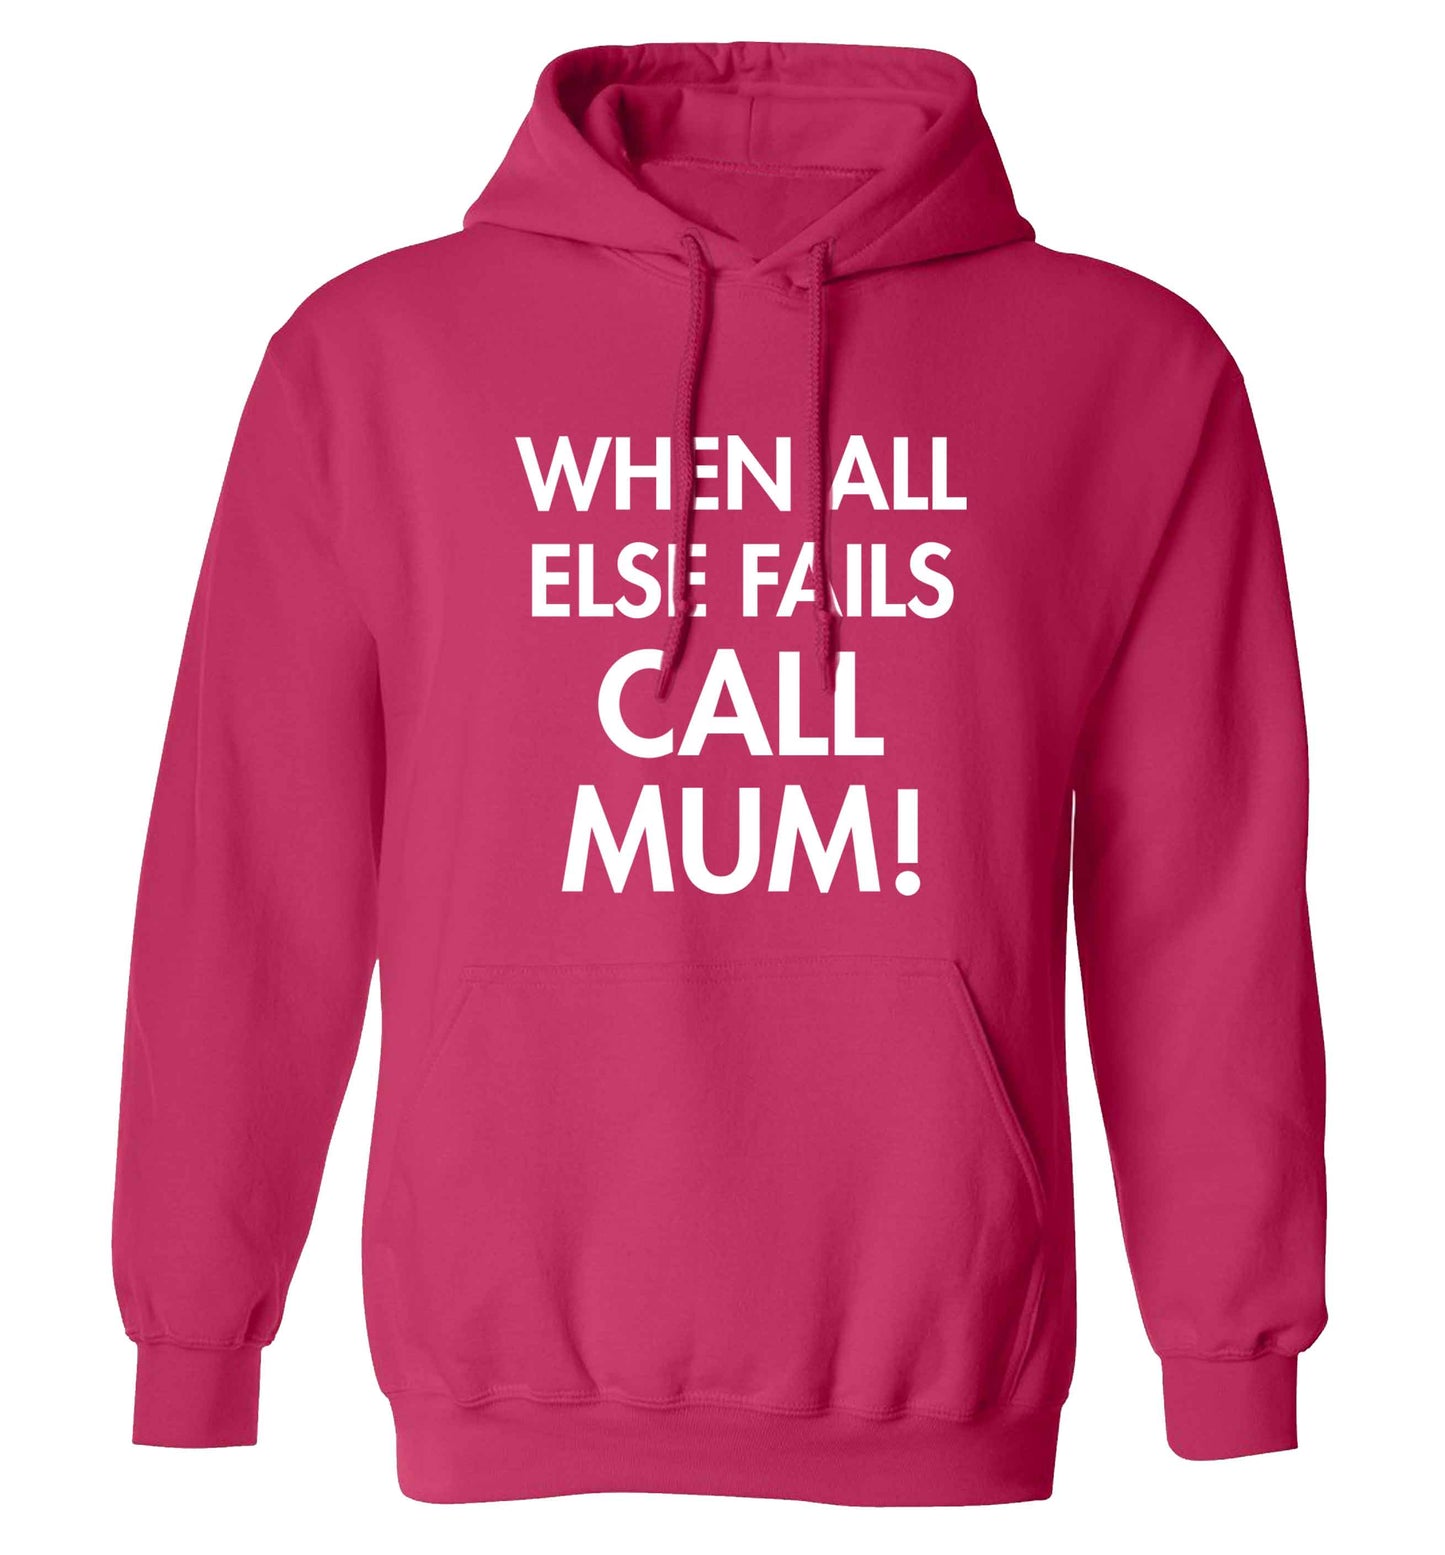 When all else fails call mum! adults unisex pink hoodie 2XL